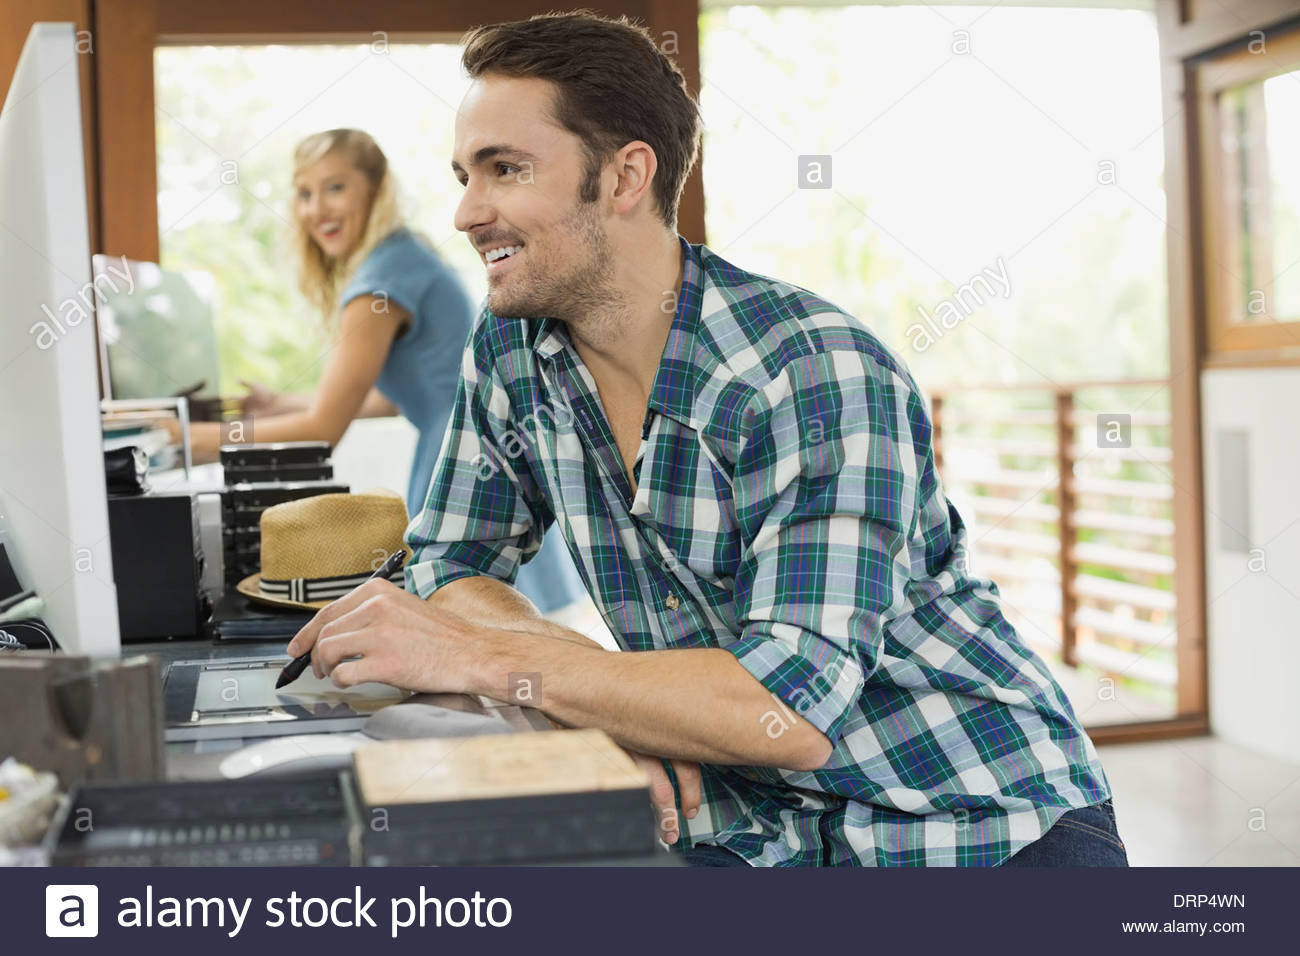 Working professionals in home office Stock Photo